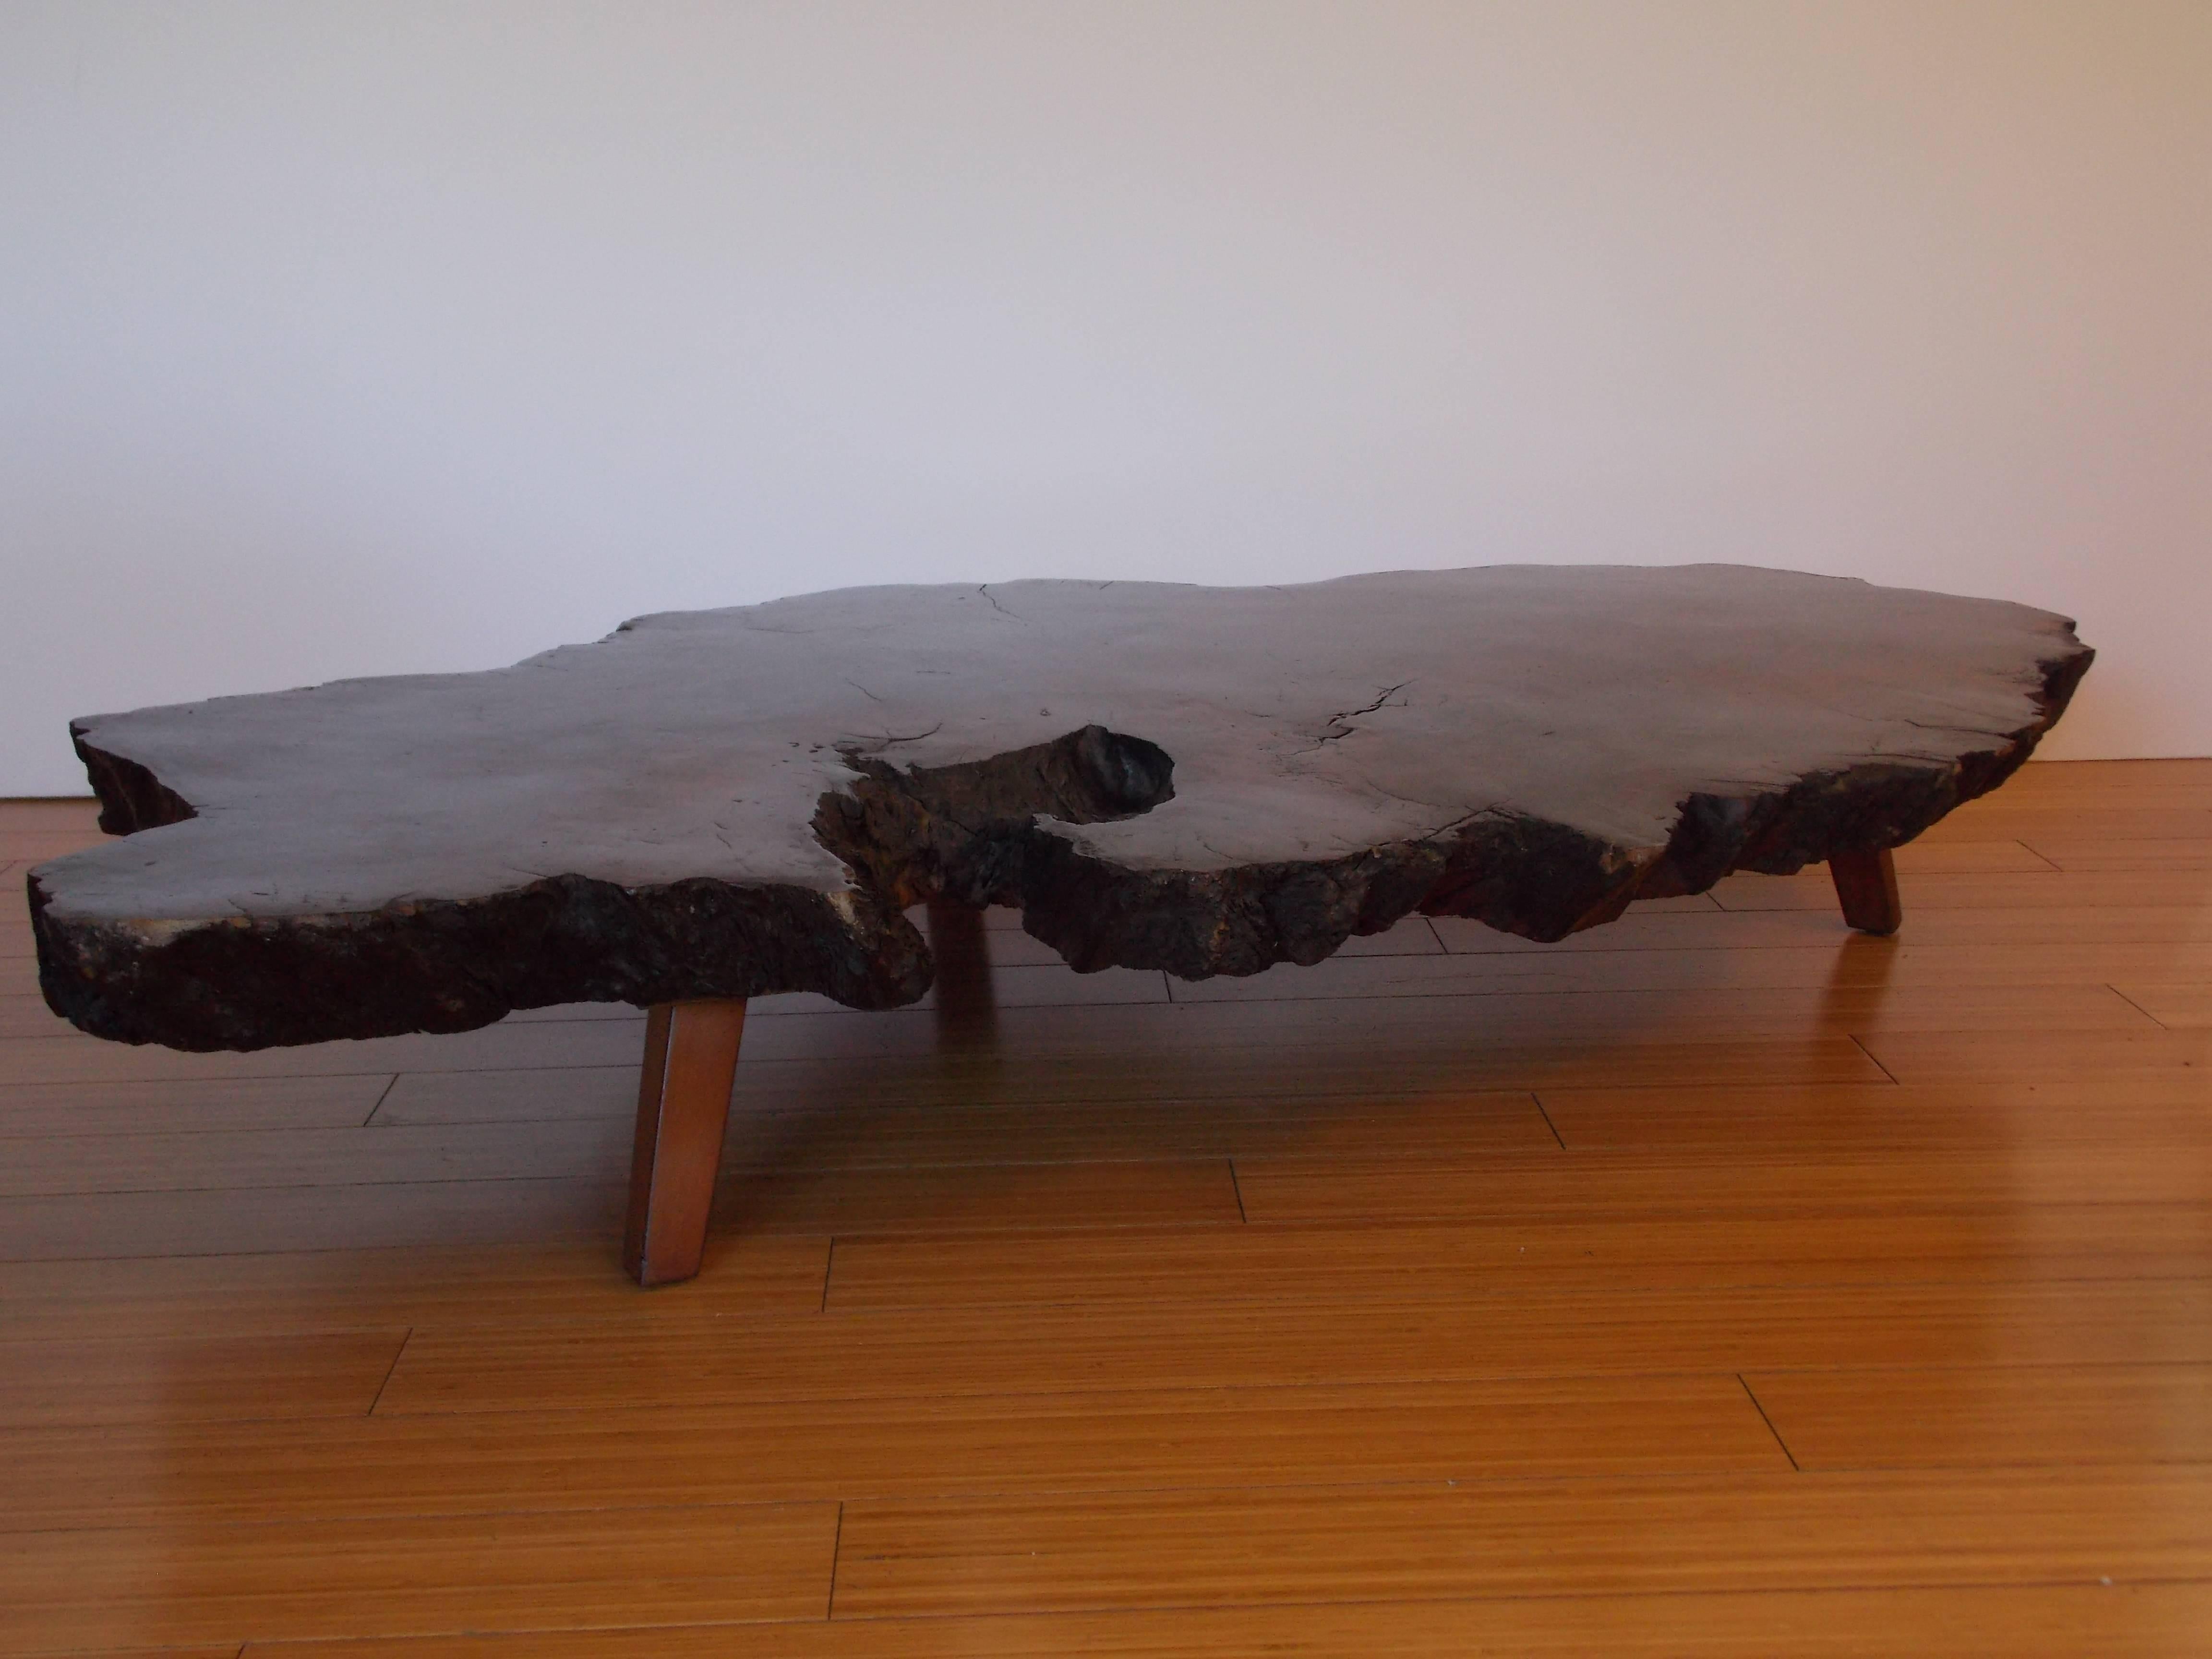 A nice rustic zen design.
It has a nice grain color.
It appears to be burl wood with birch wood legs.
It has not been refinished and is in the original vintage / used condition.
It shows ware with patina consistent with age.
Solid and sturdy.
 